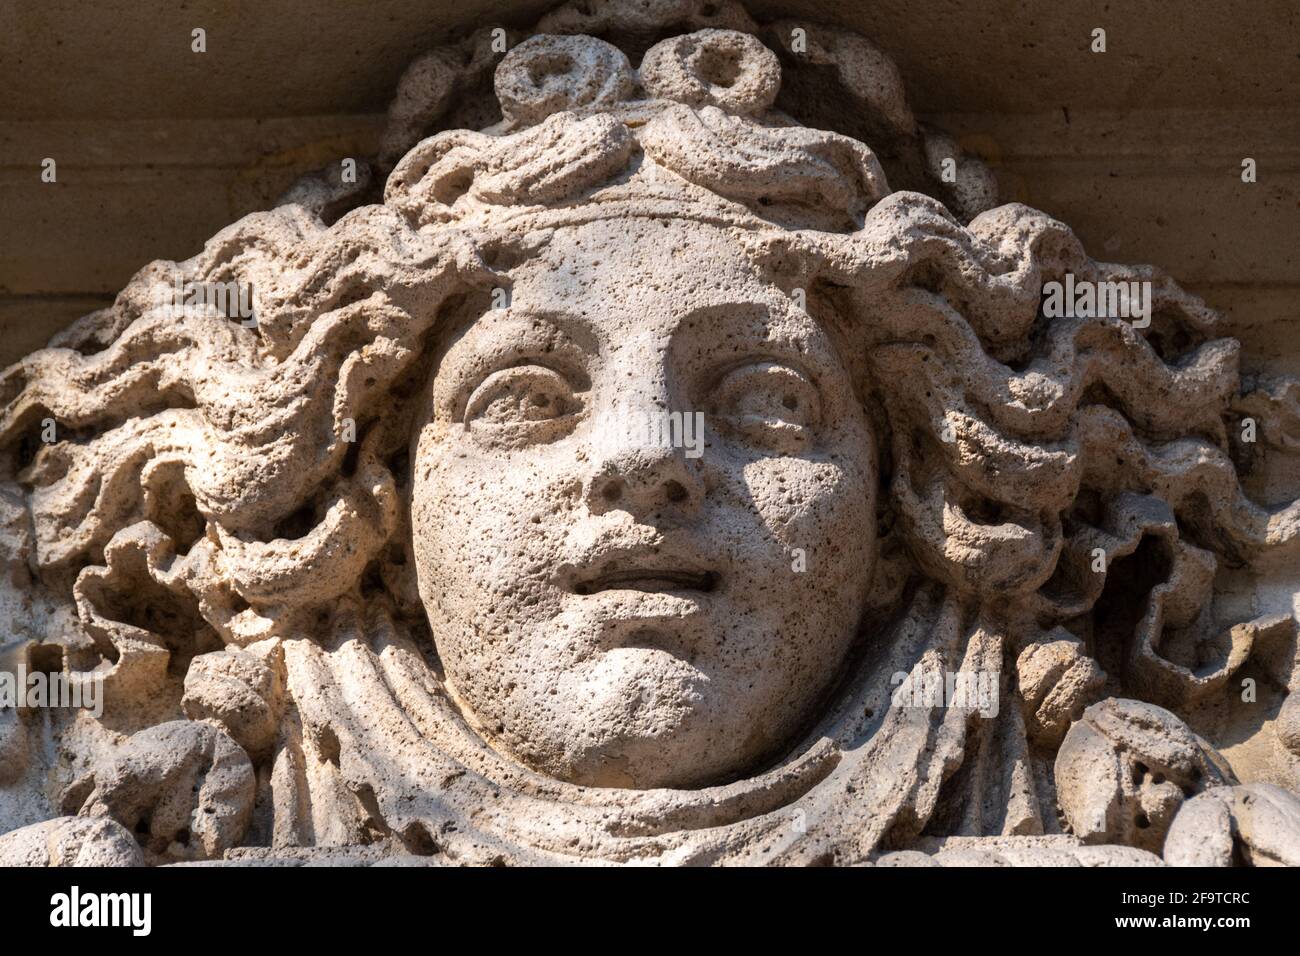 Woman's face carved in stone, probably an allegory of fortune, facade ornament of an old building in Paris, France Stock Photo